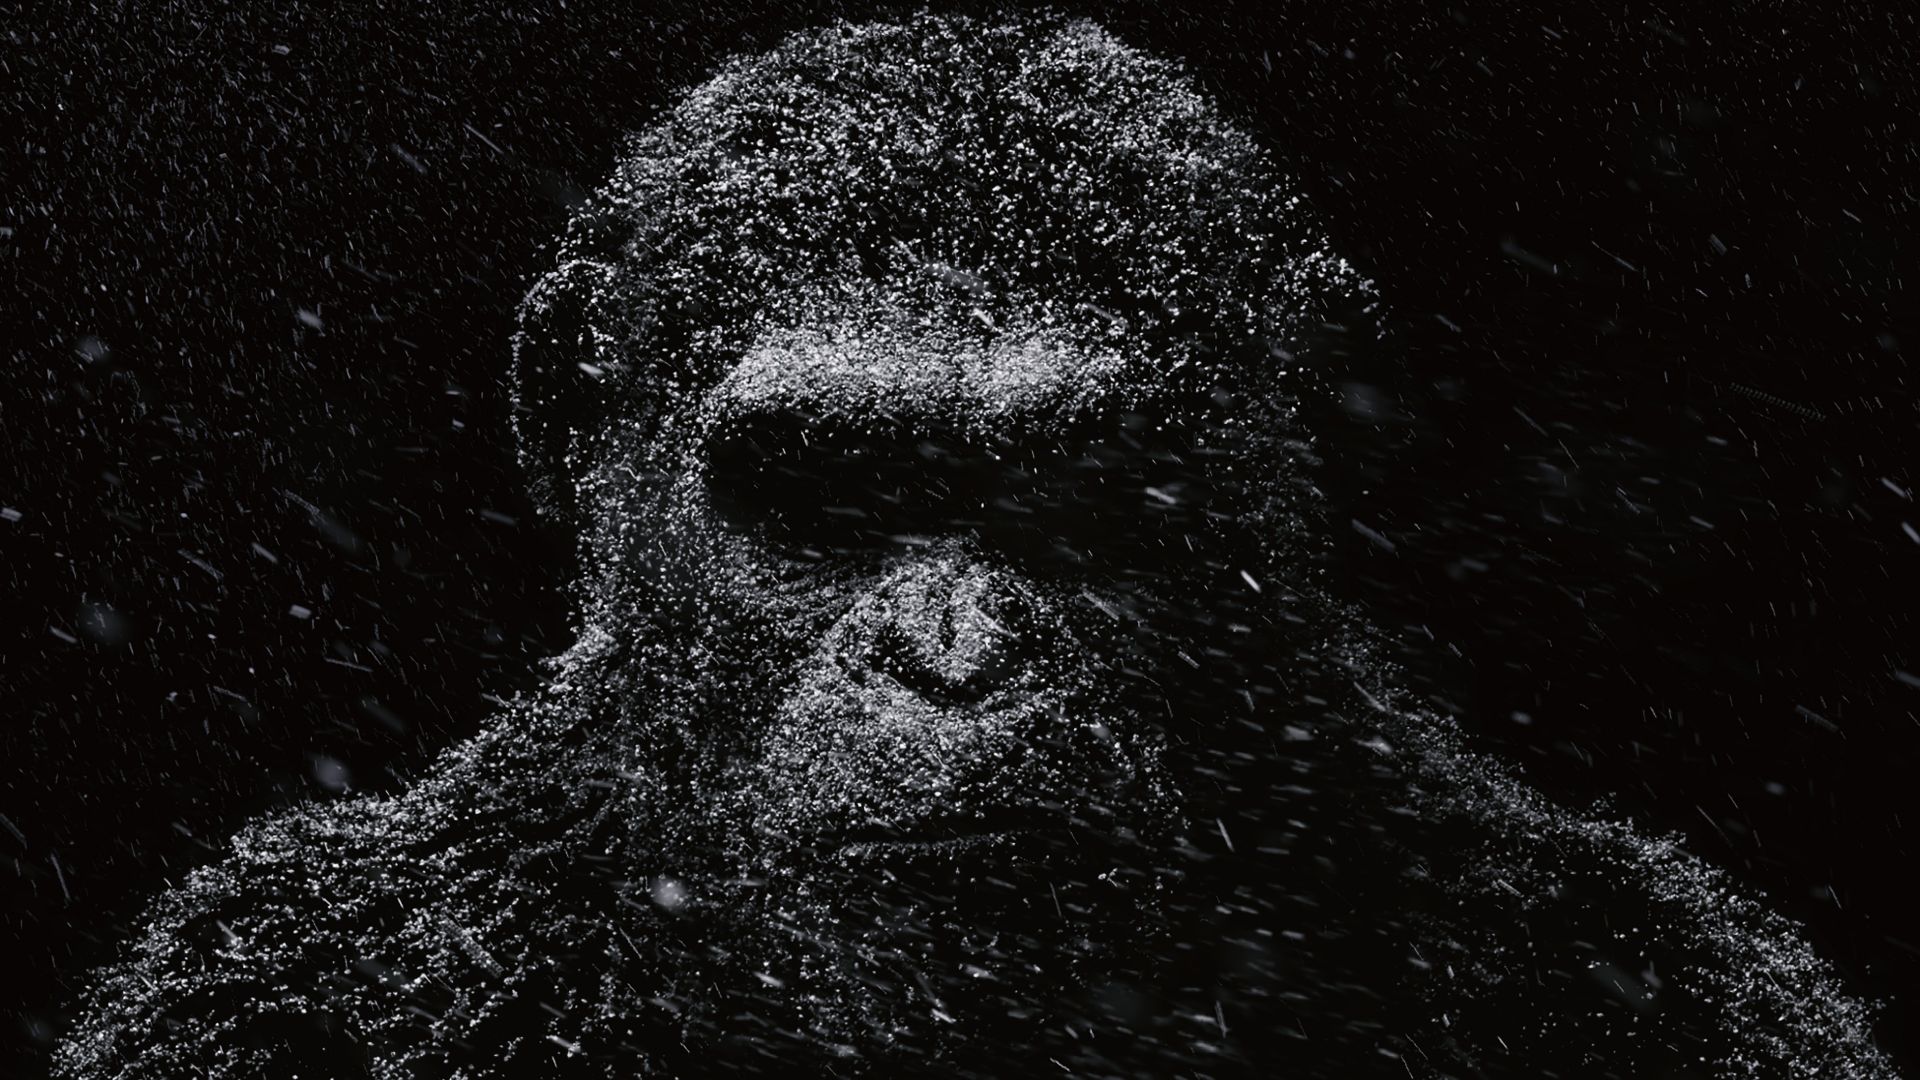 War for the Planet of the Apes, ape, 4k (horizontal)